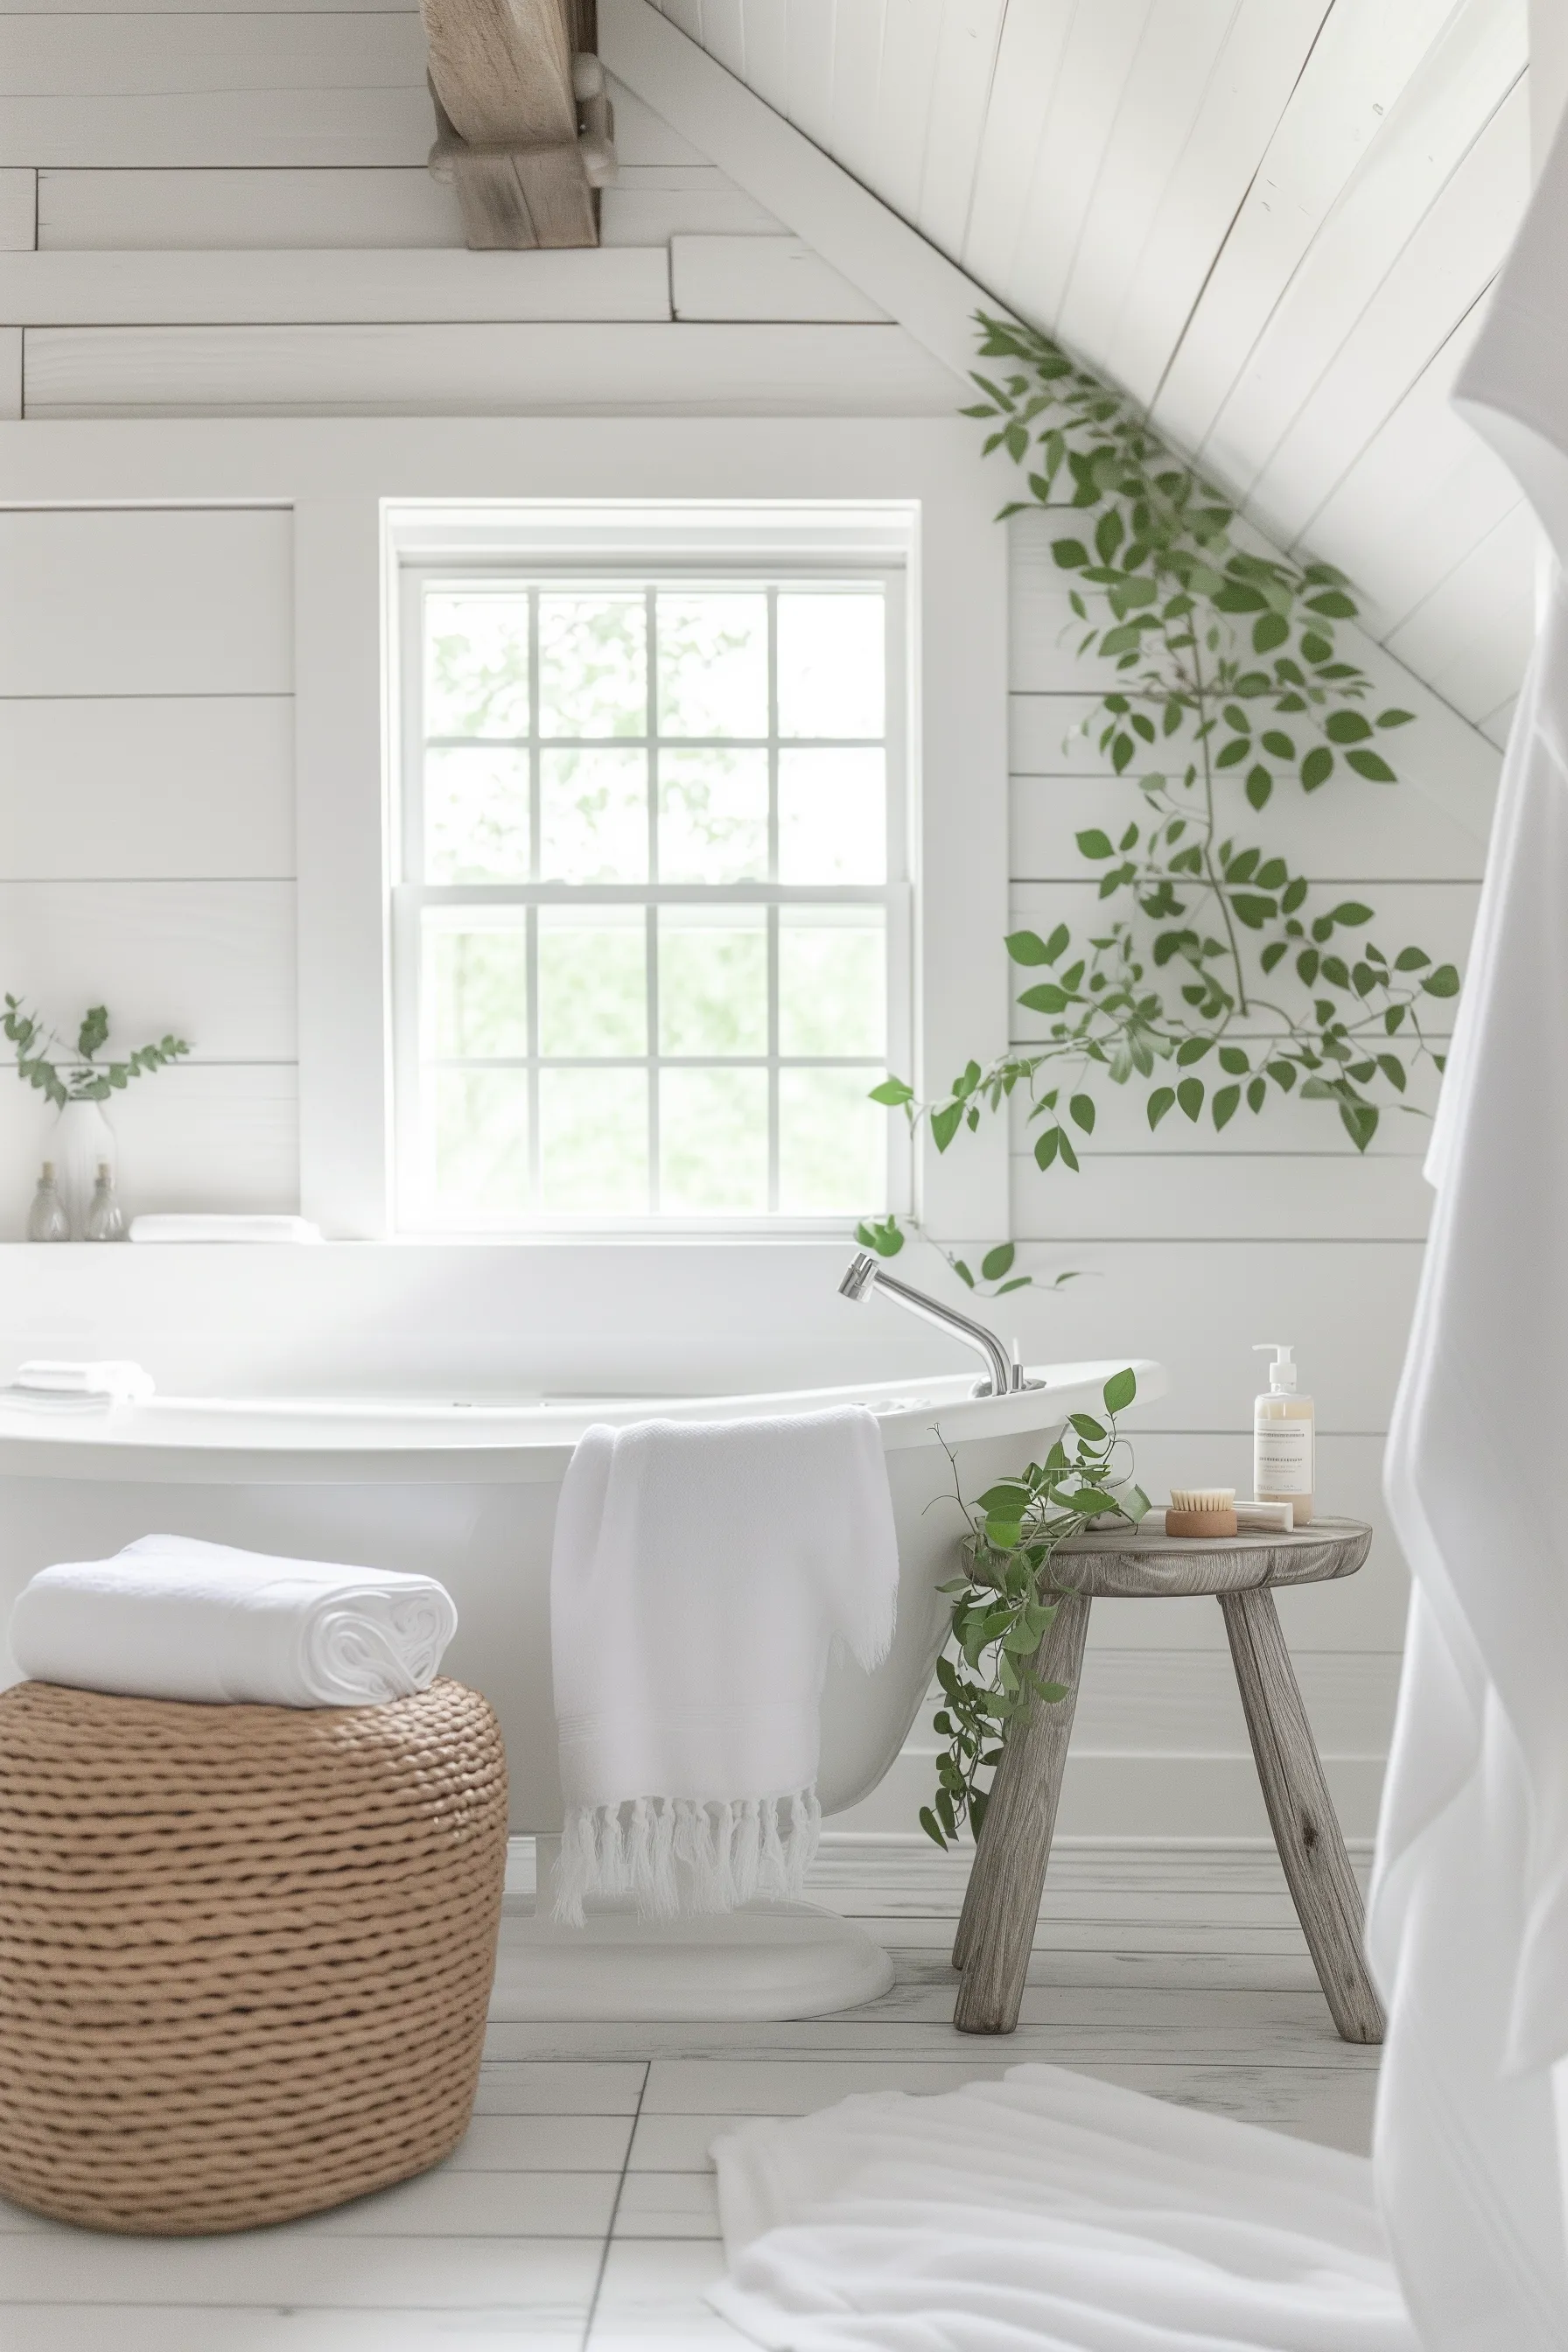 White shiplap walls with a ottoman, wooden stool and tub